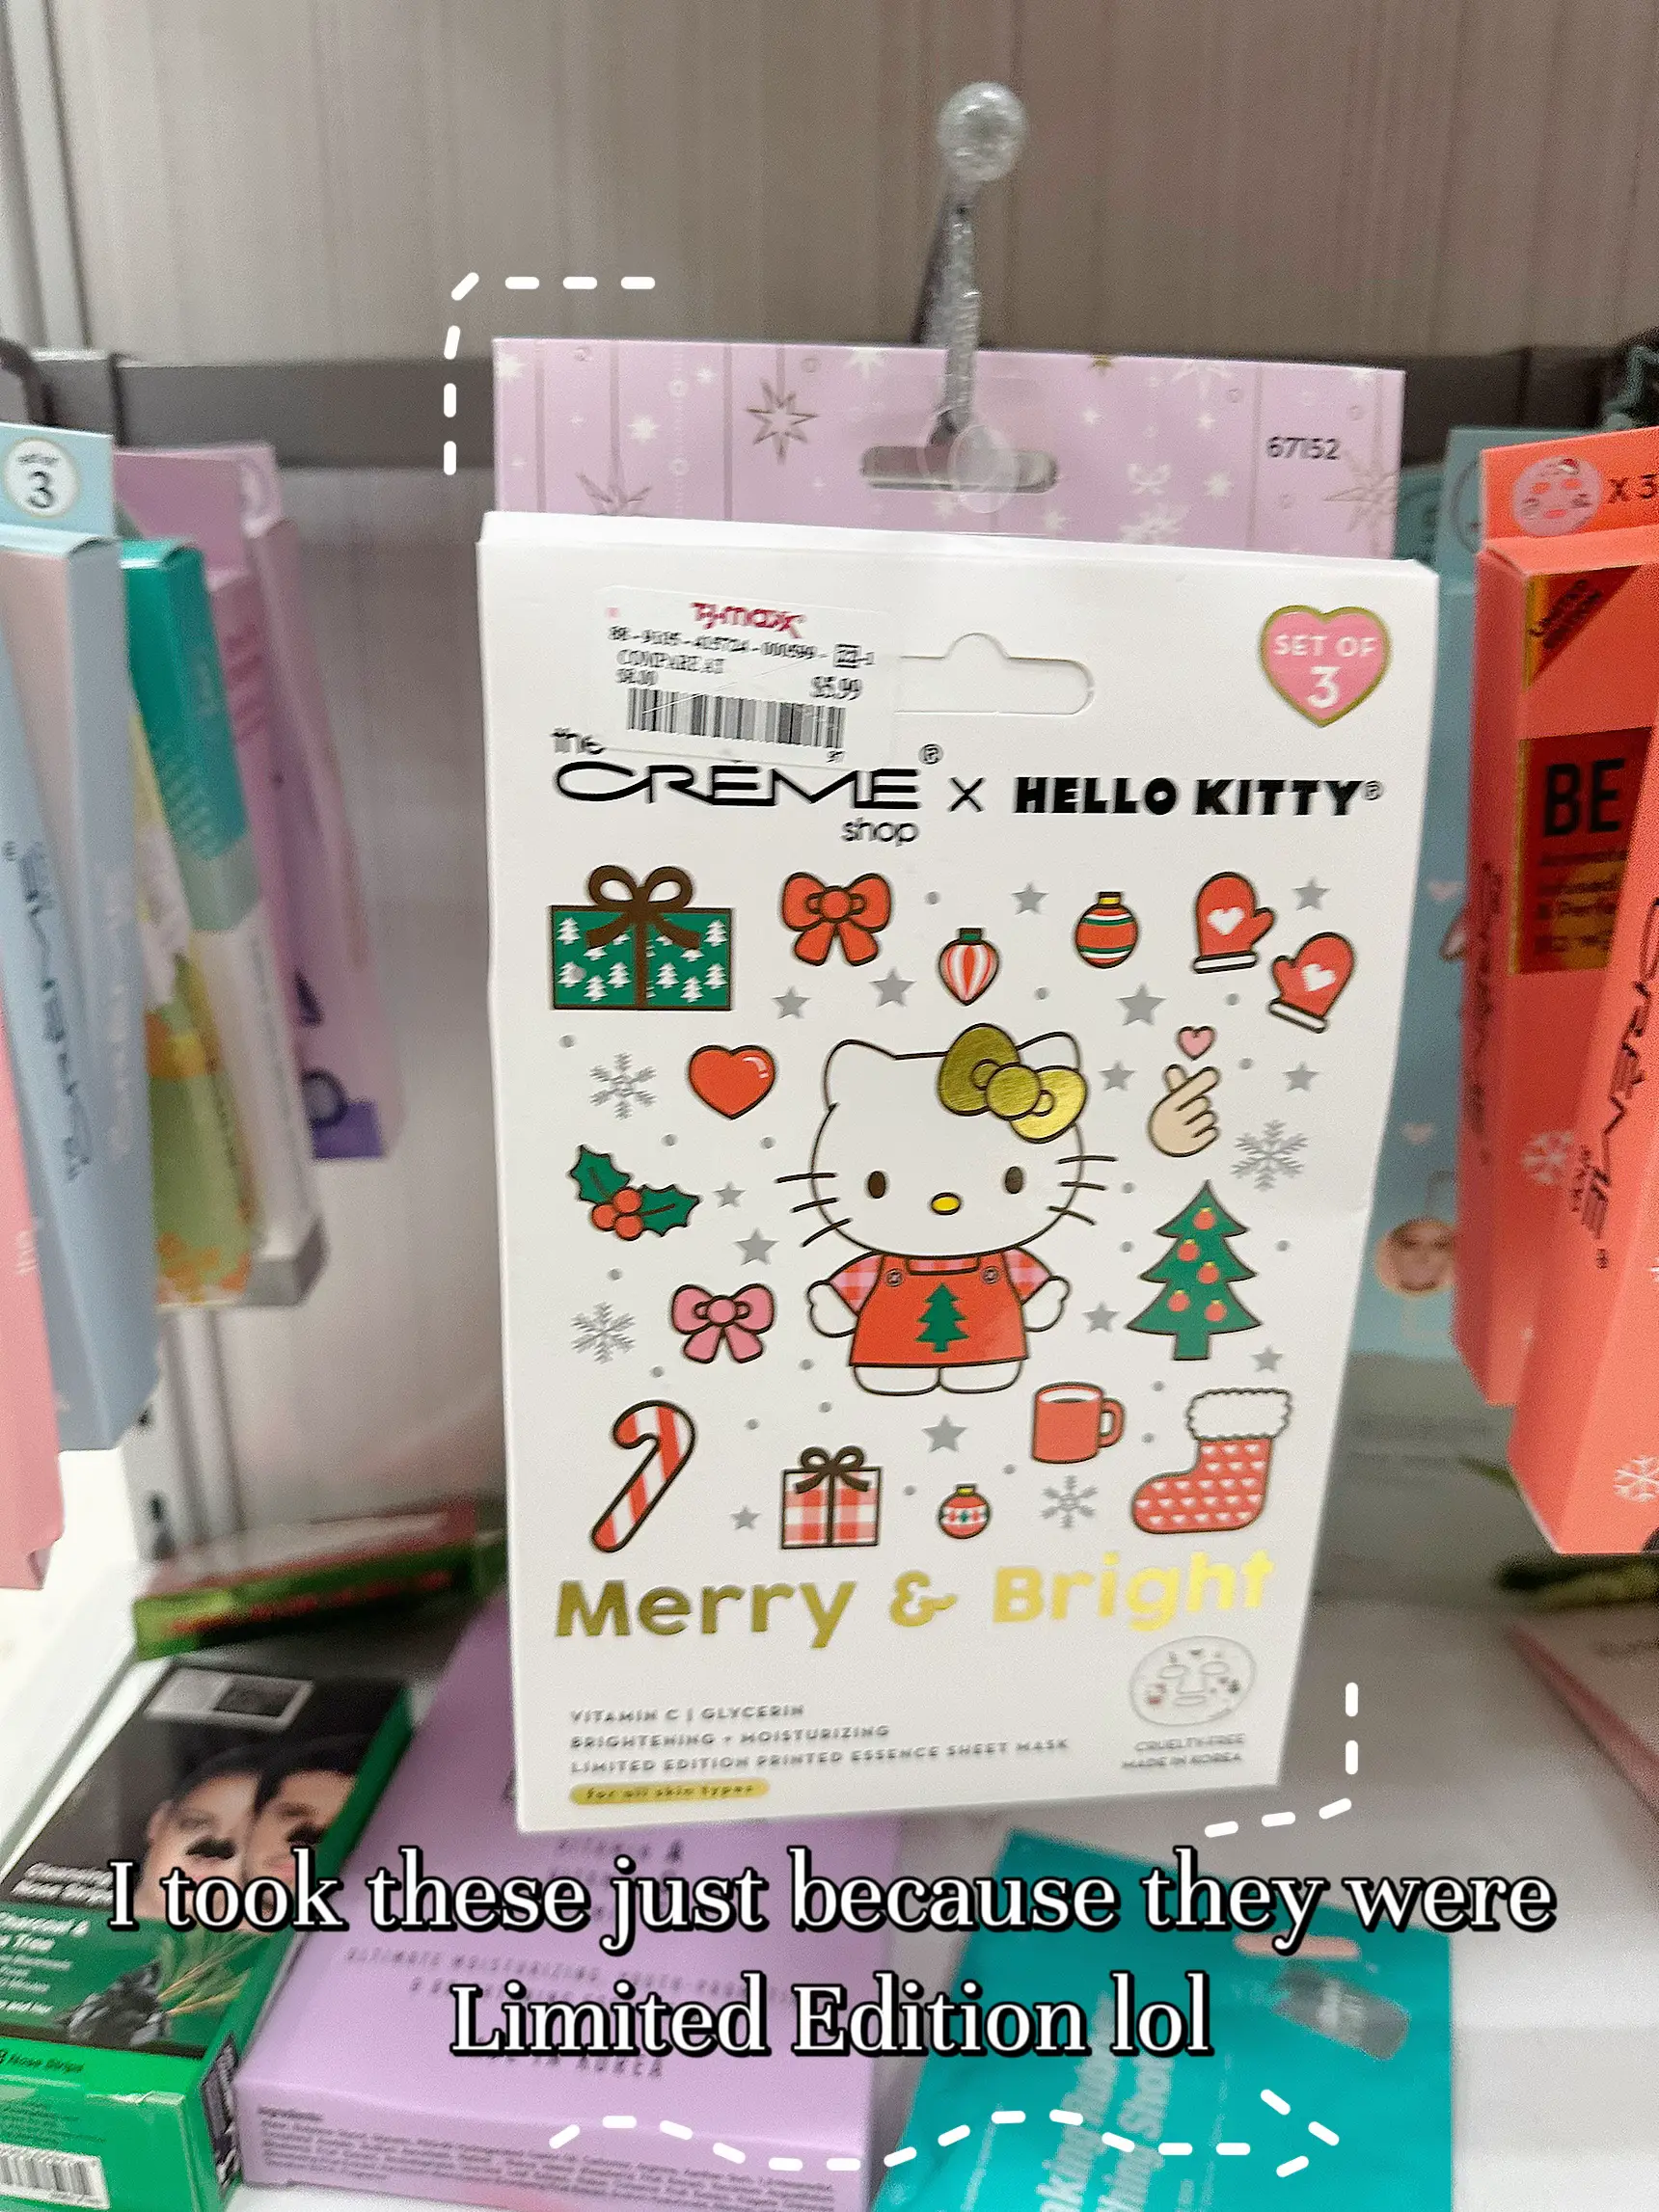 HELLO KITTY AT TJMAXX, Gallery posted by Stacey